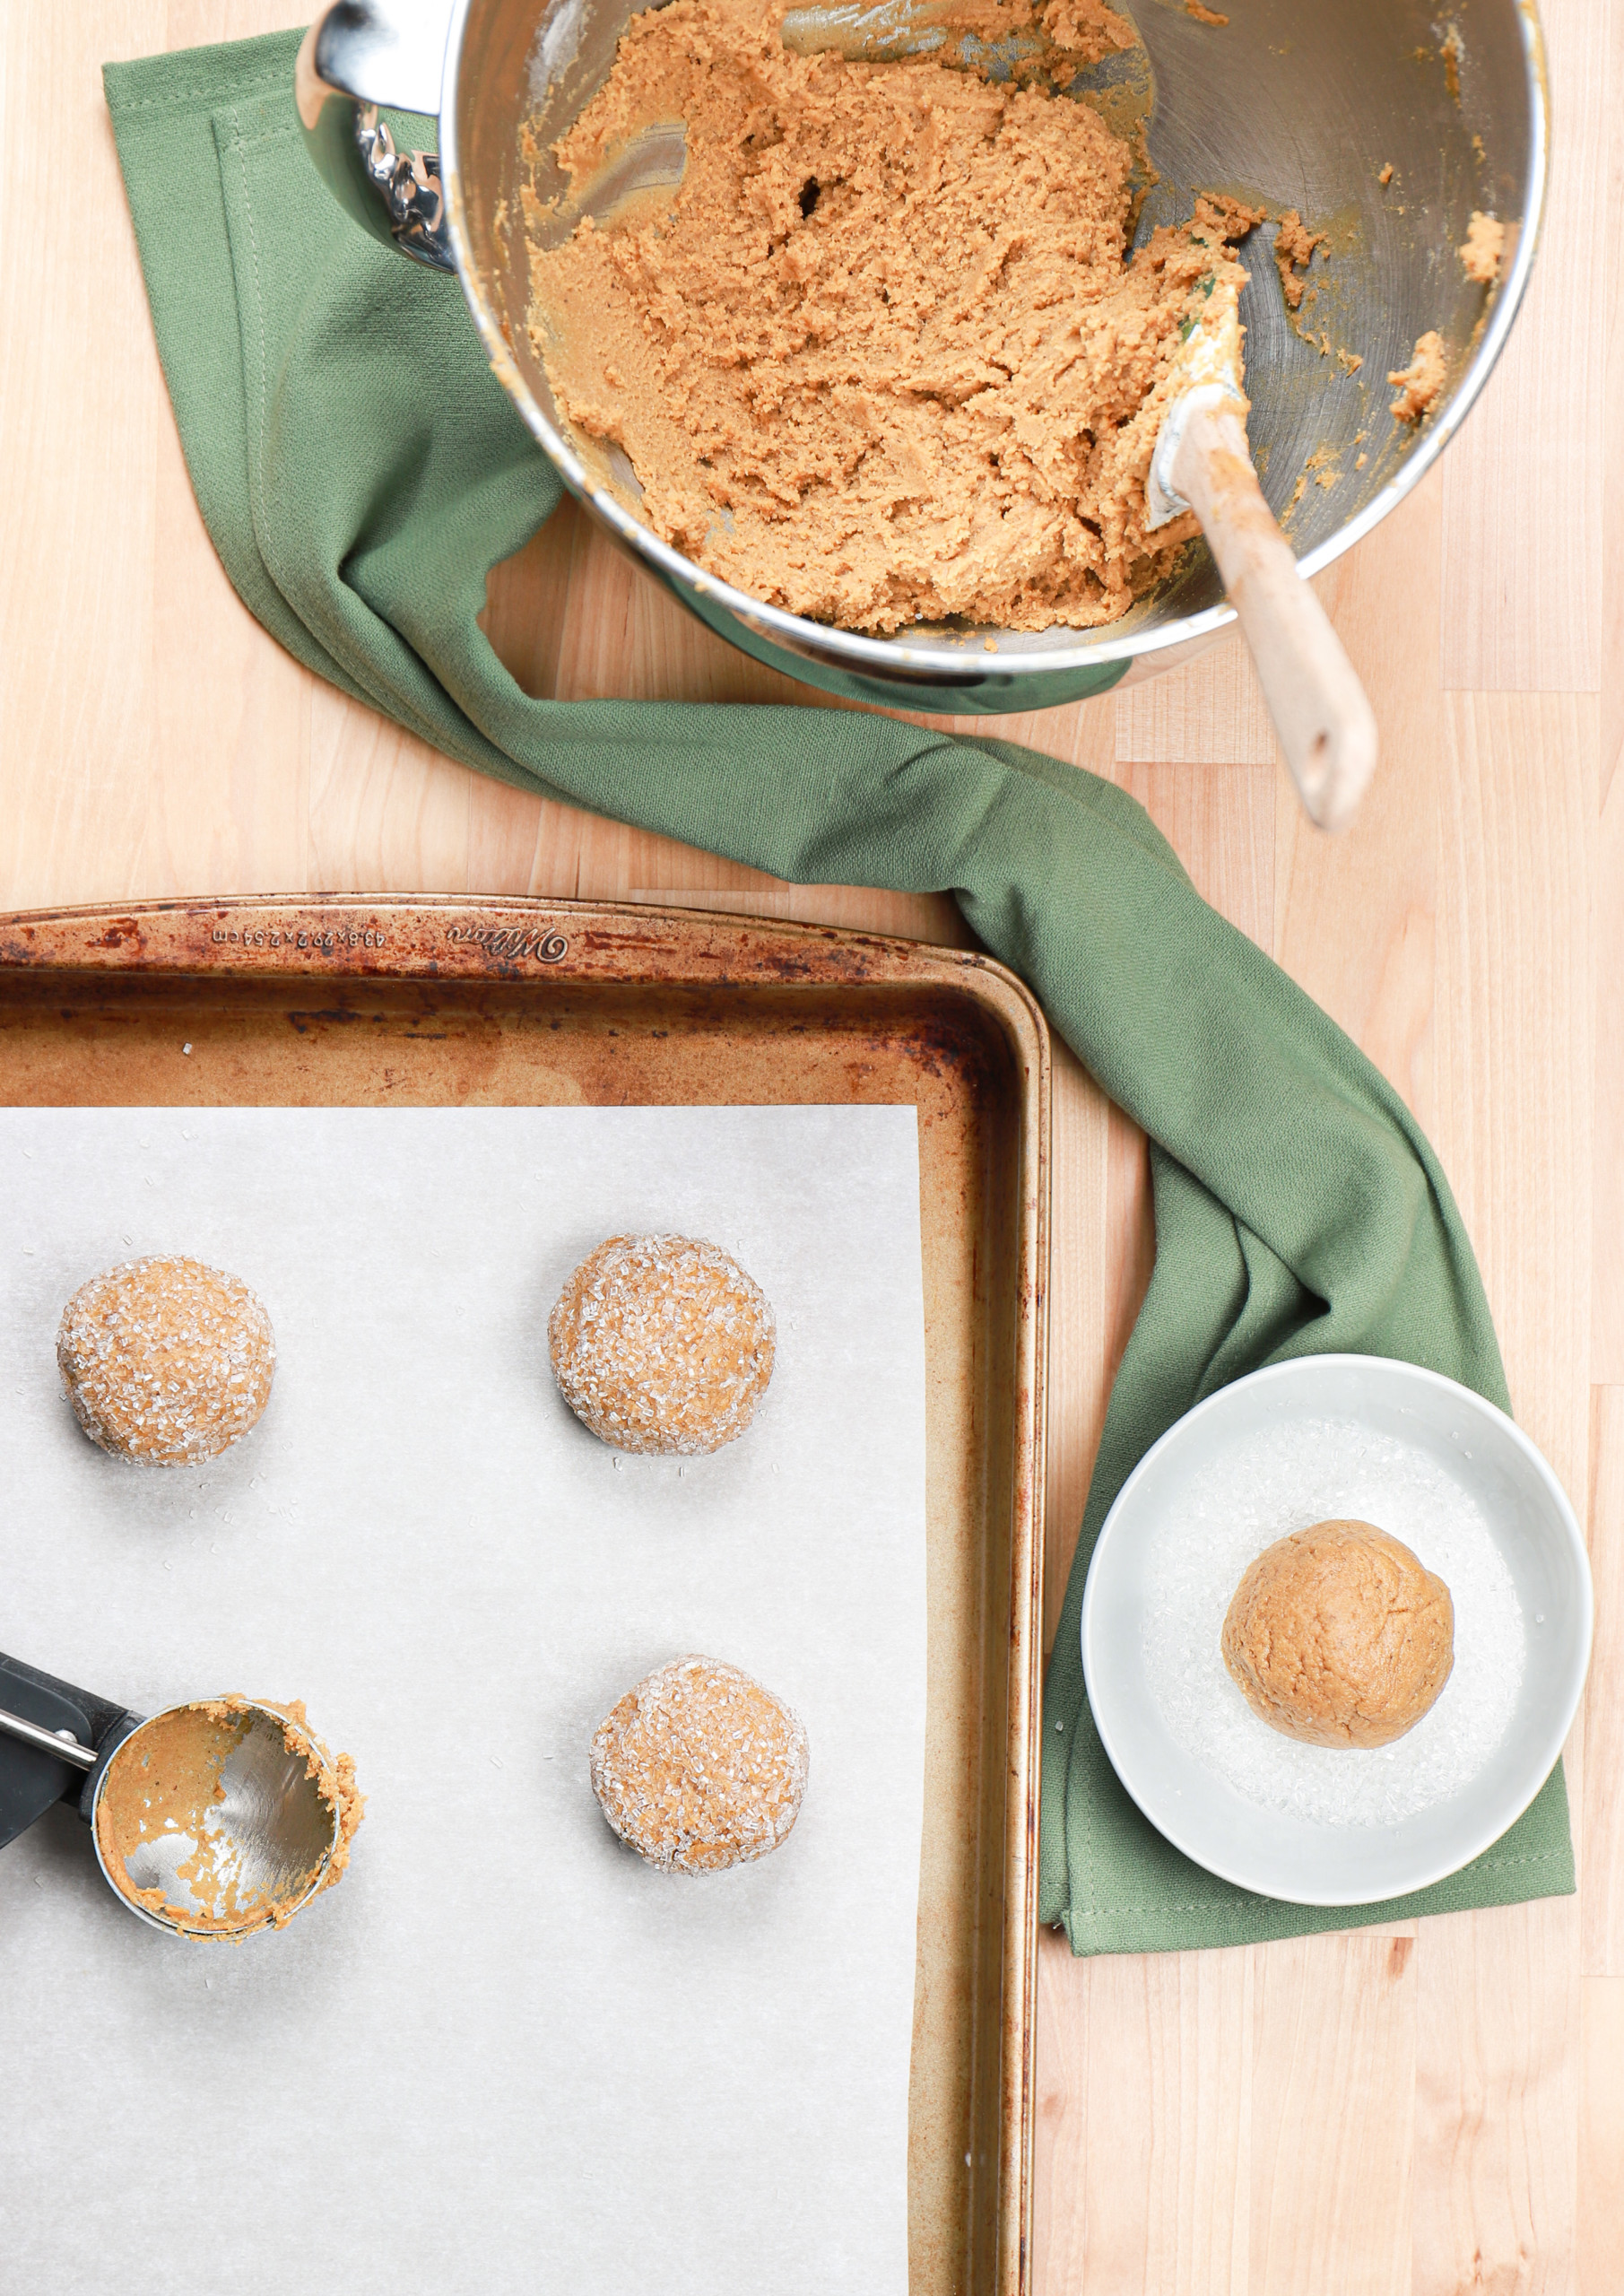 Molasses cookie dough balls on a parchment paper lined baking sheet before baking.